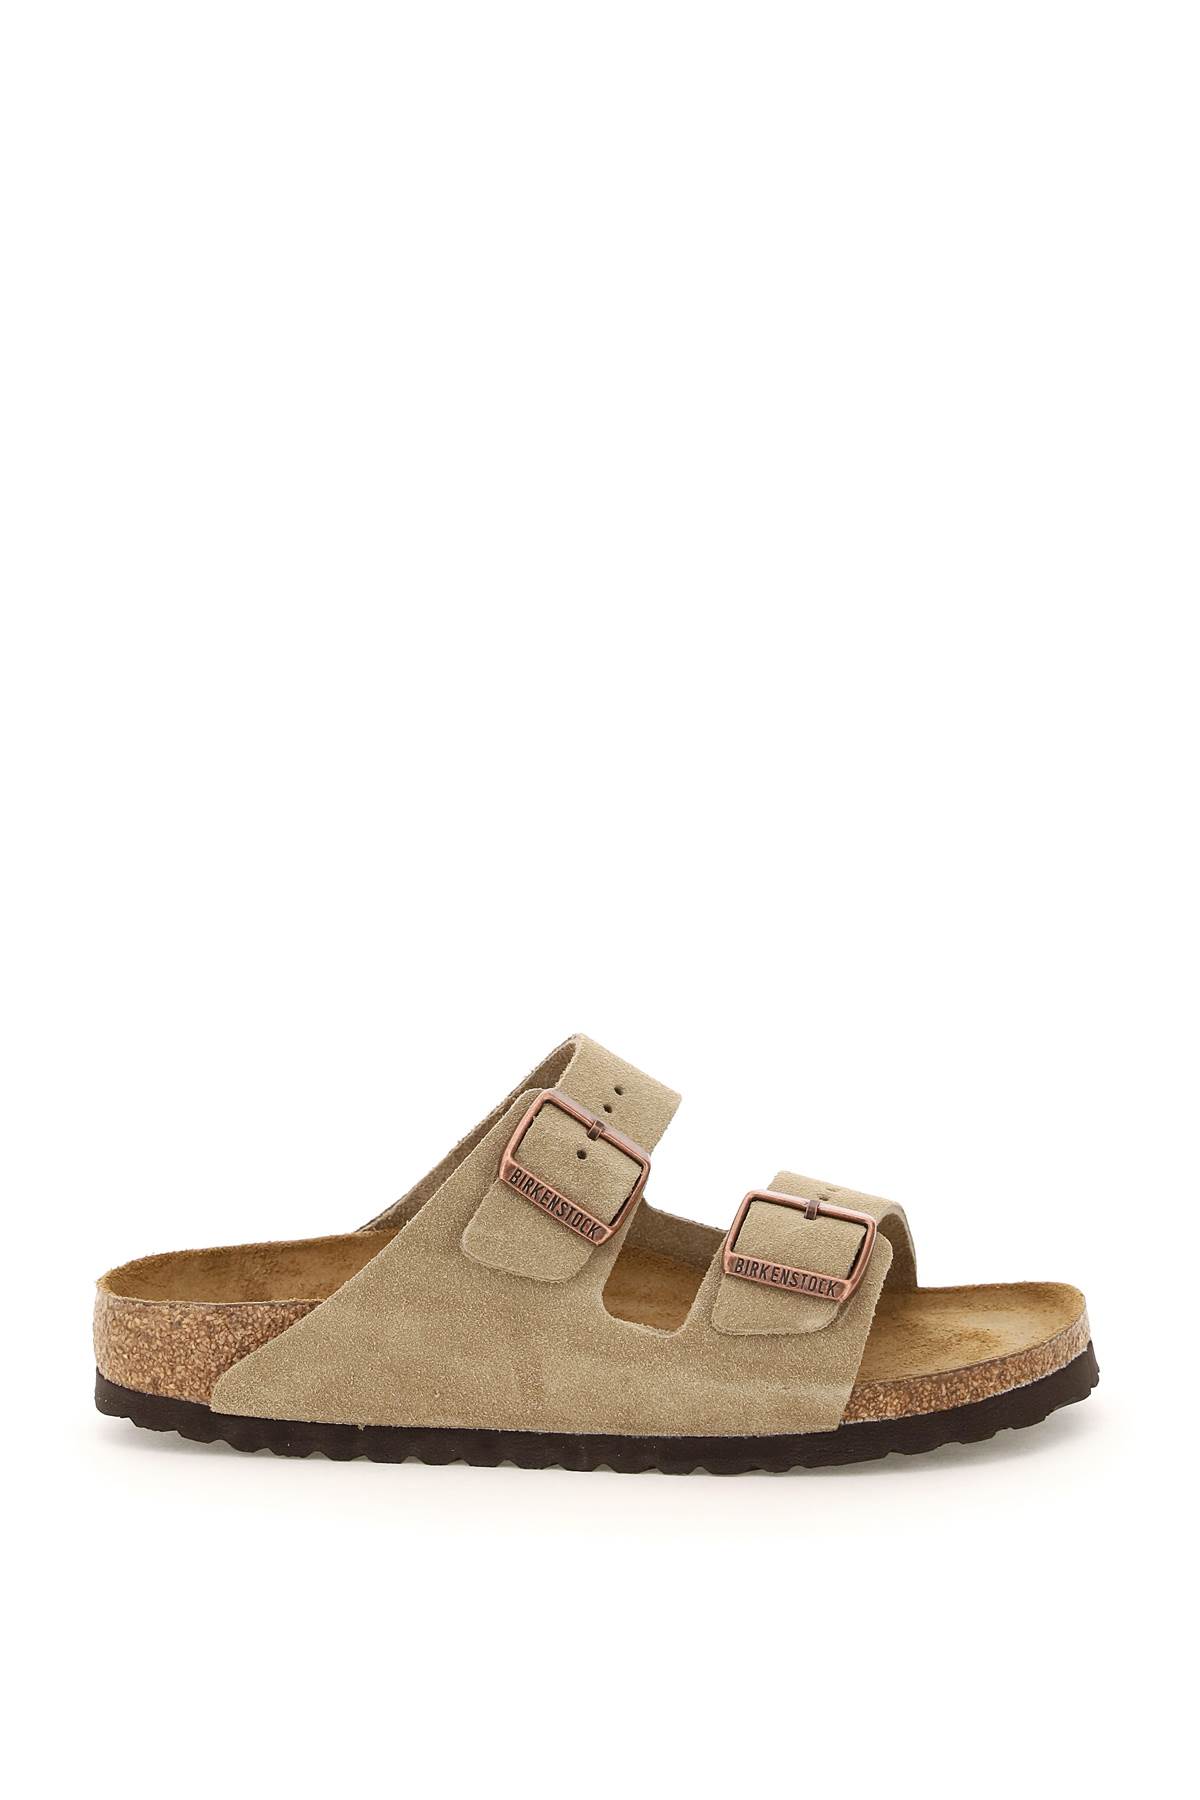 Shop Birkenstock Arizona Mules Soft Footbed In Taupe